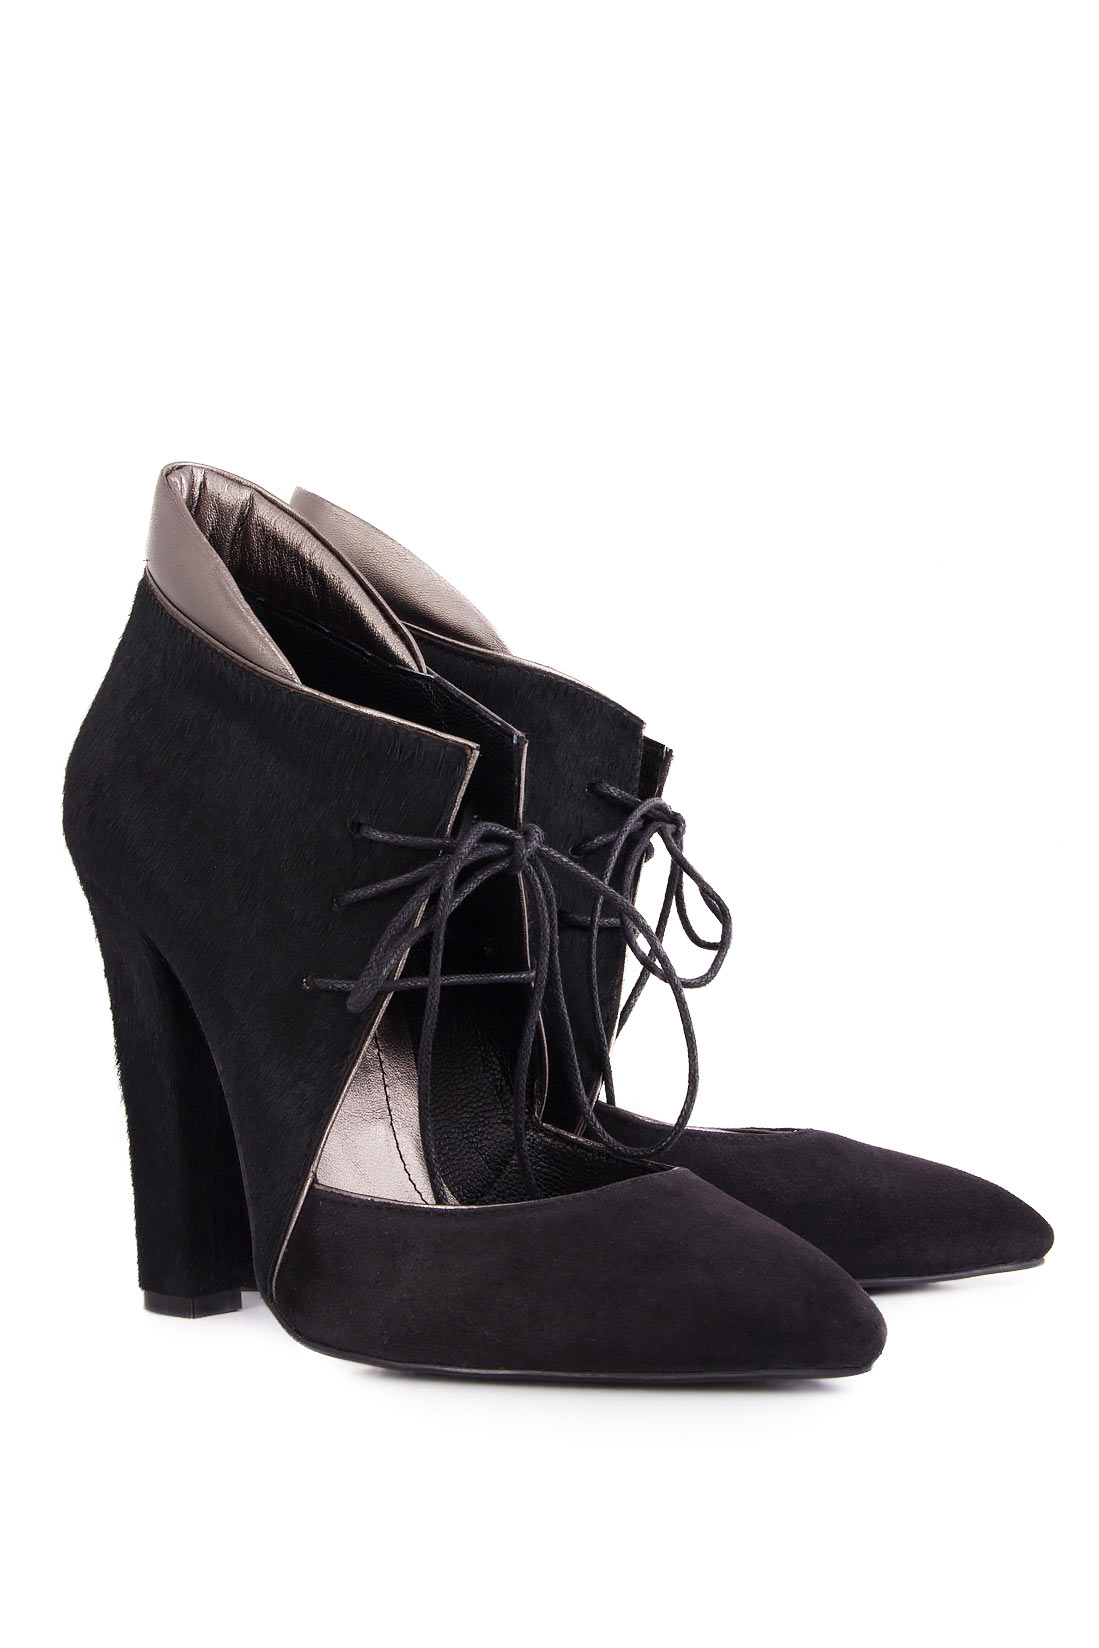 Suede ankle boots Ana Kaloni image 1